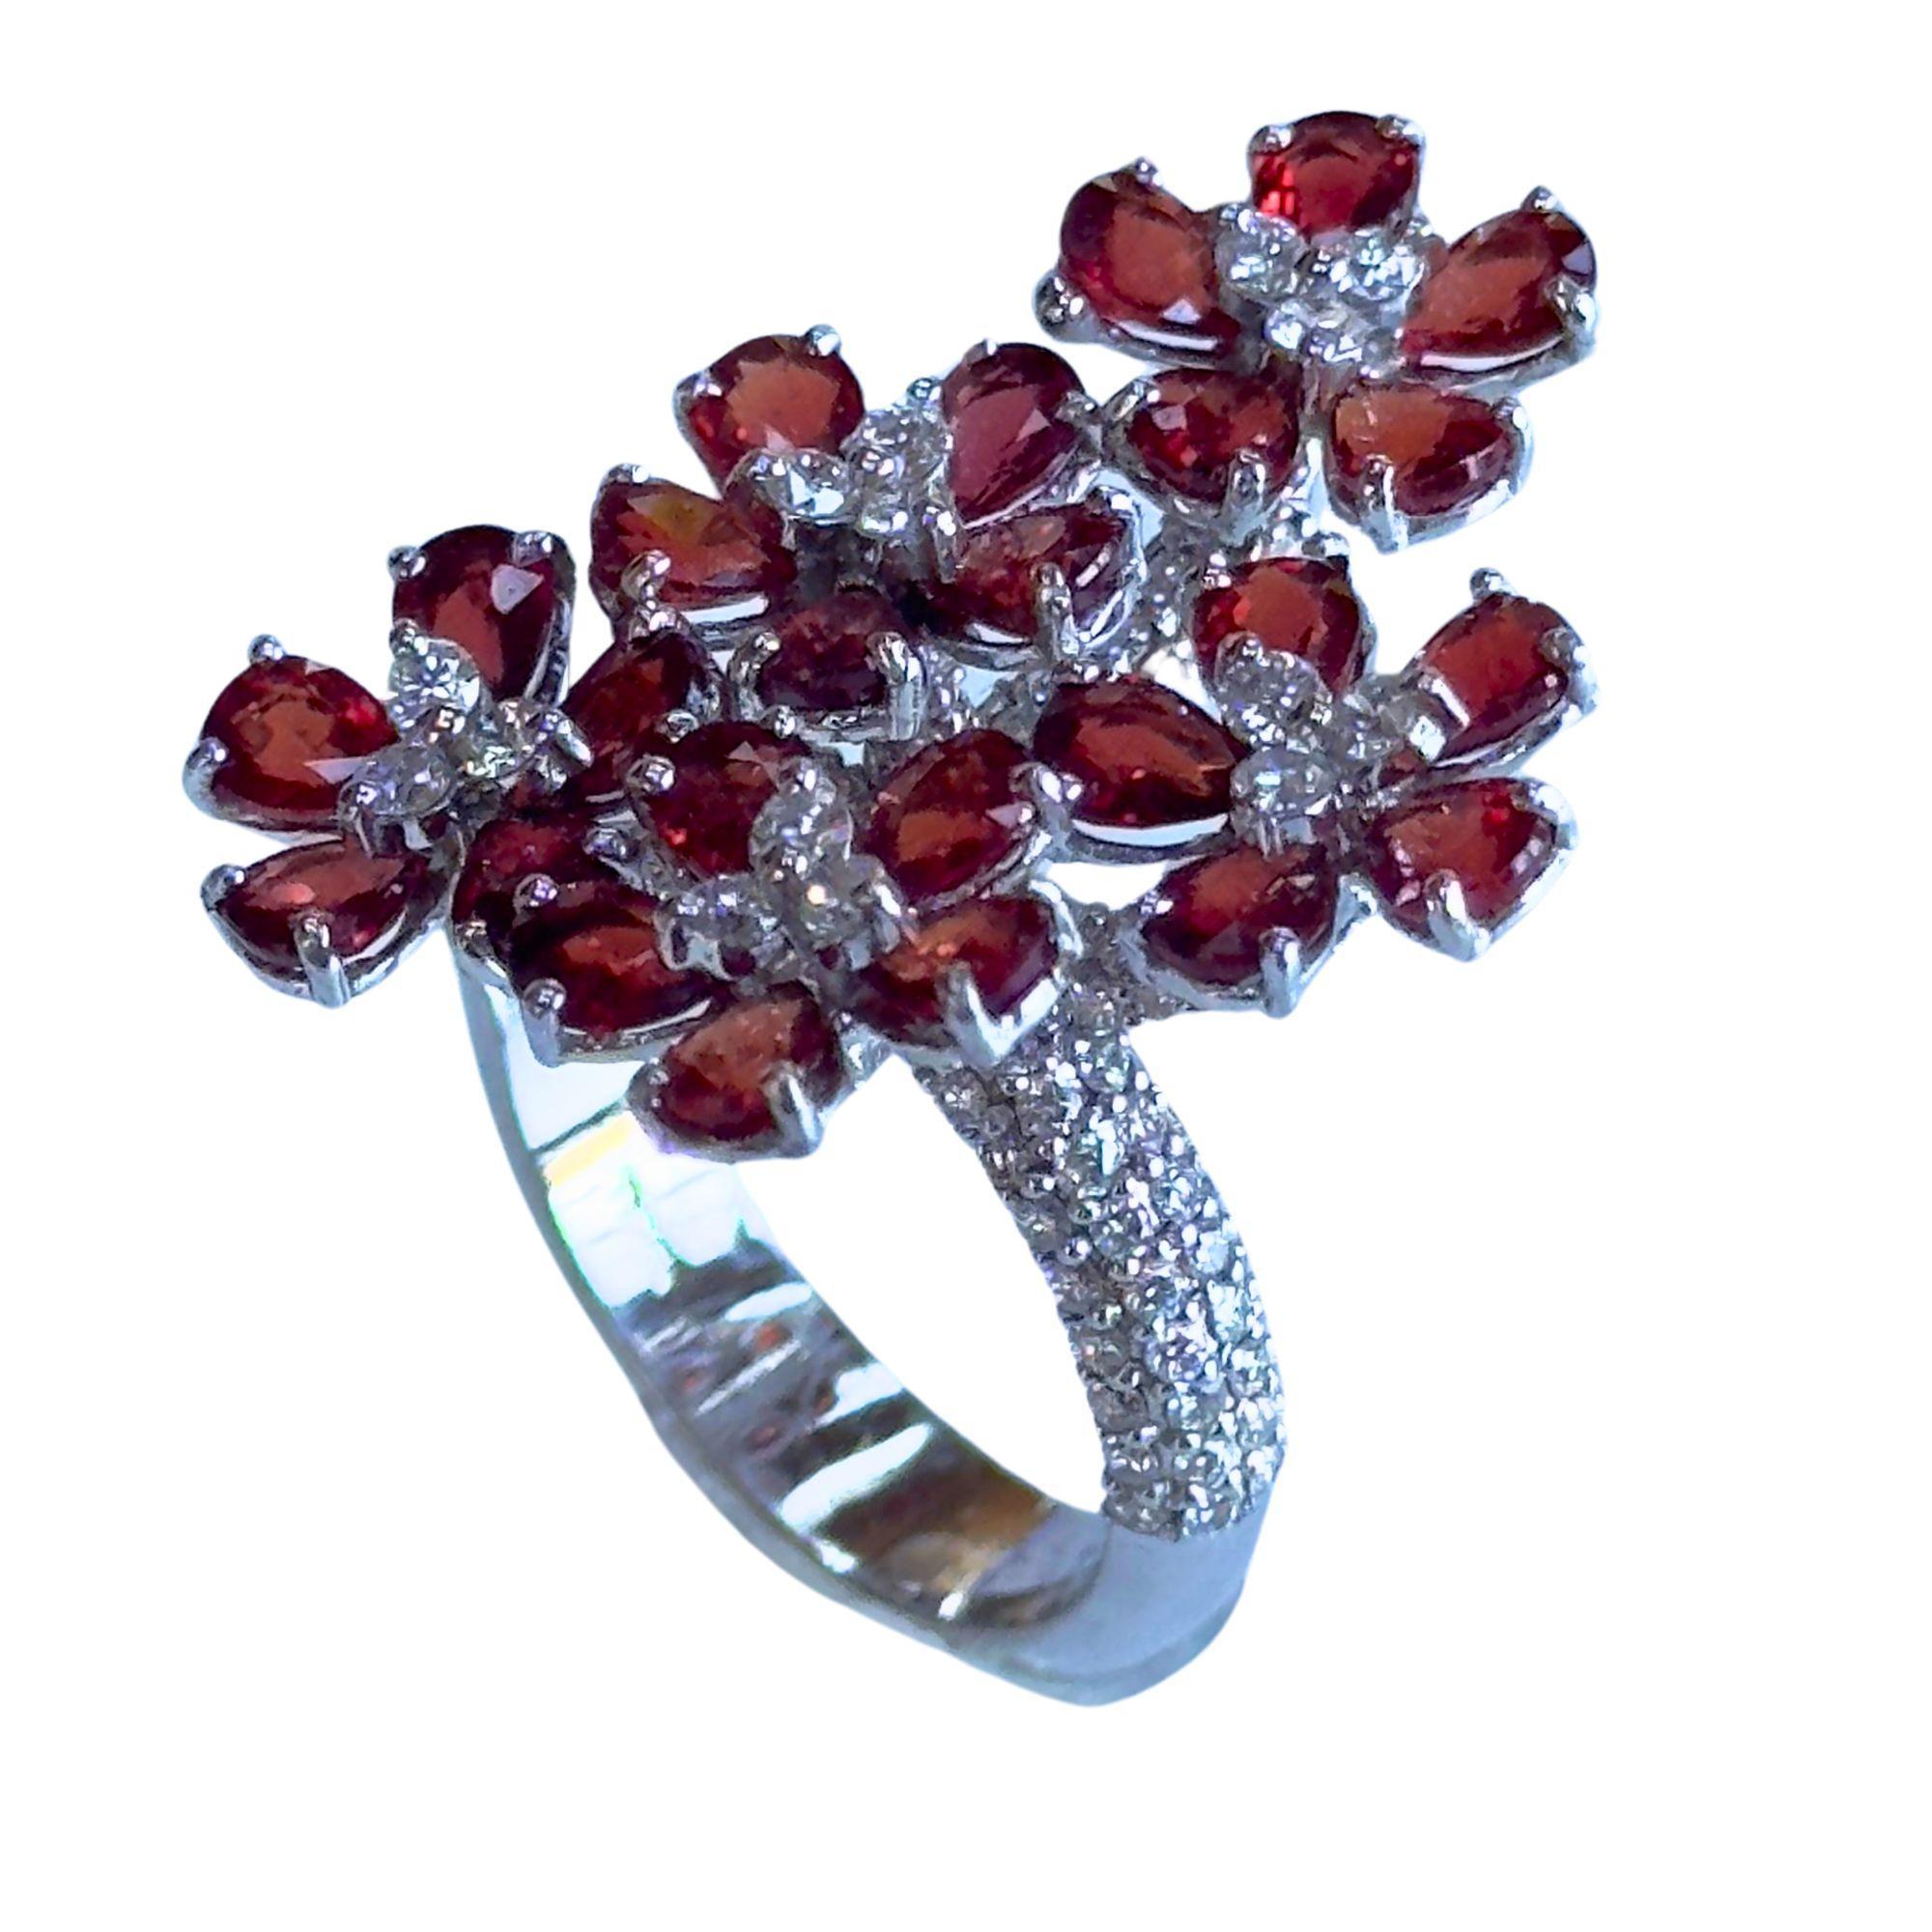 This dainty and dazzling 18k Diamond and Ruby Floral Ring is sure to make a statement on your finger! Crafted with 18k white gold and adorned with 1.35 carats of sparkling diamonds and 5.17 carats of rubies, this ring is truly unique. Ring size 6.5